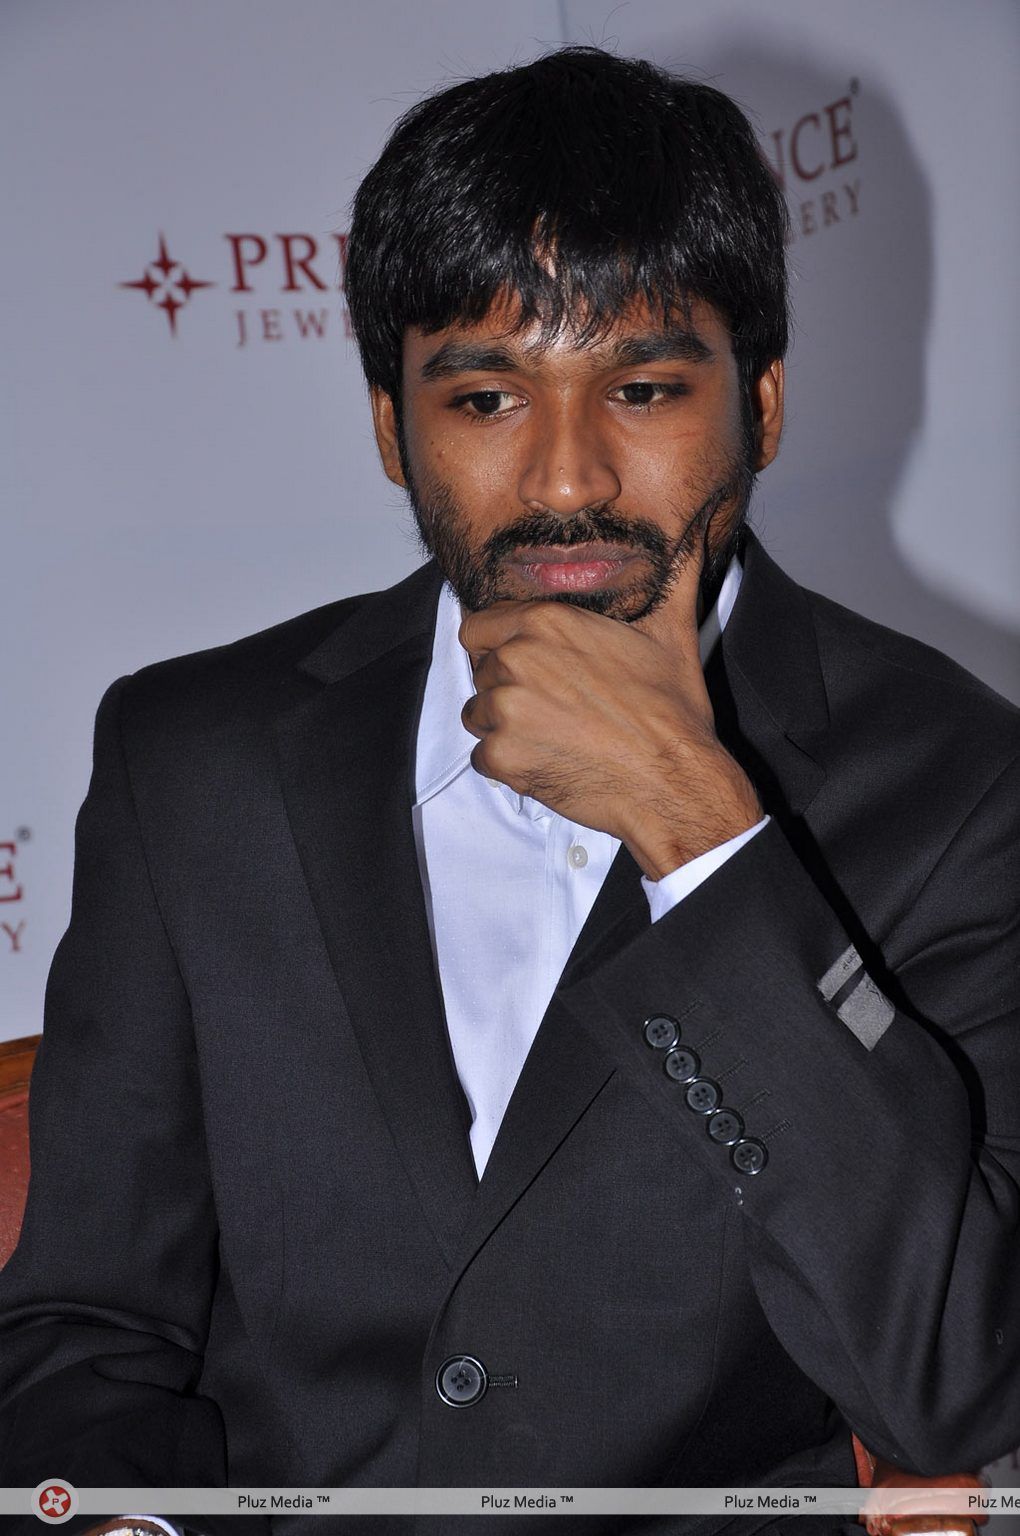 Dhanush - Aishwarya and Dhanush unveil Prince Jewellery's Platinum - Pictures | Picture 139421